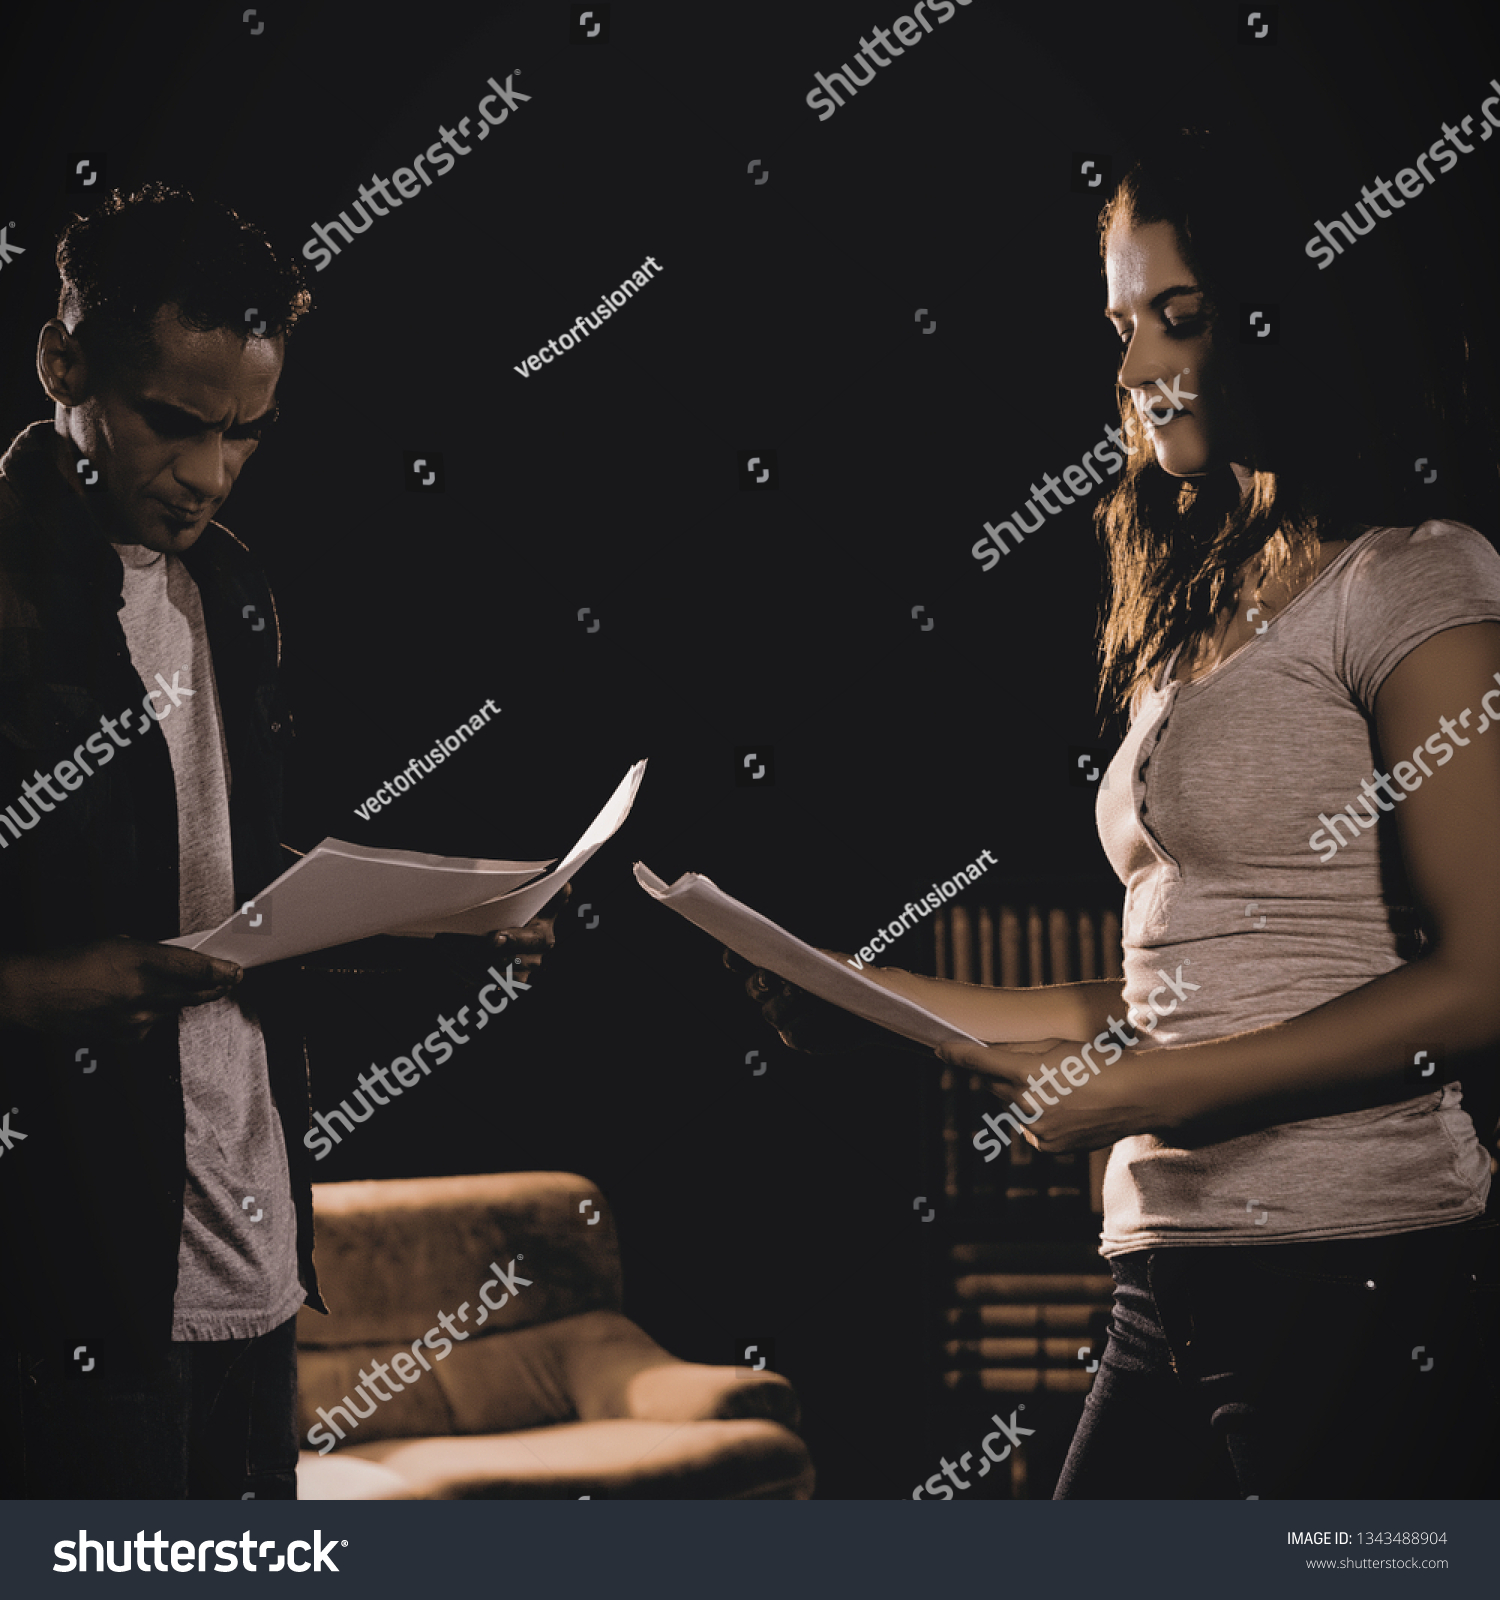 Actors reading their scripts on stage in theatre #1343488904